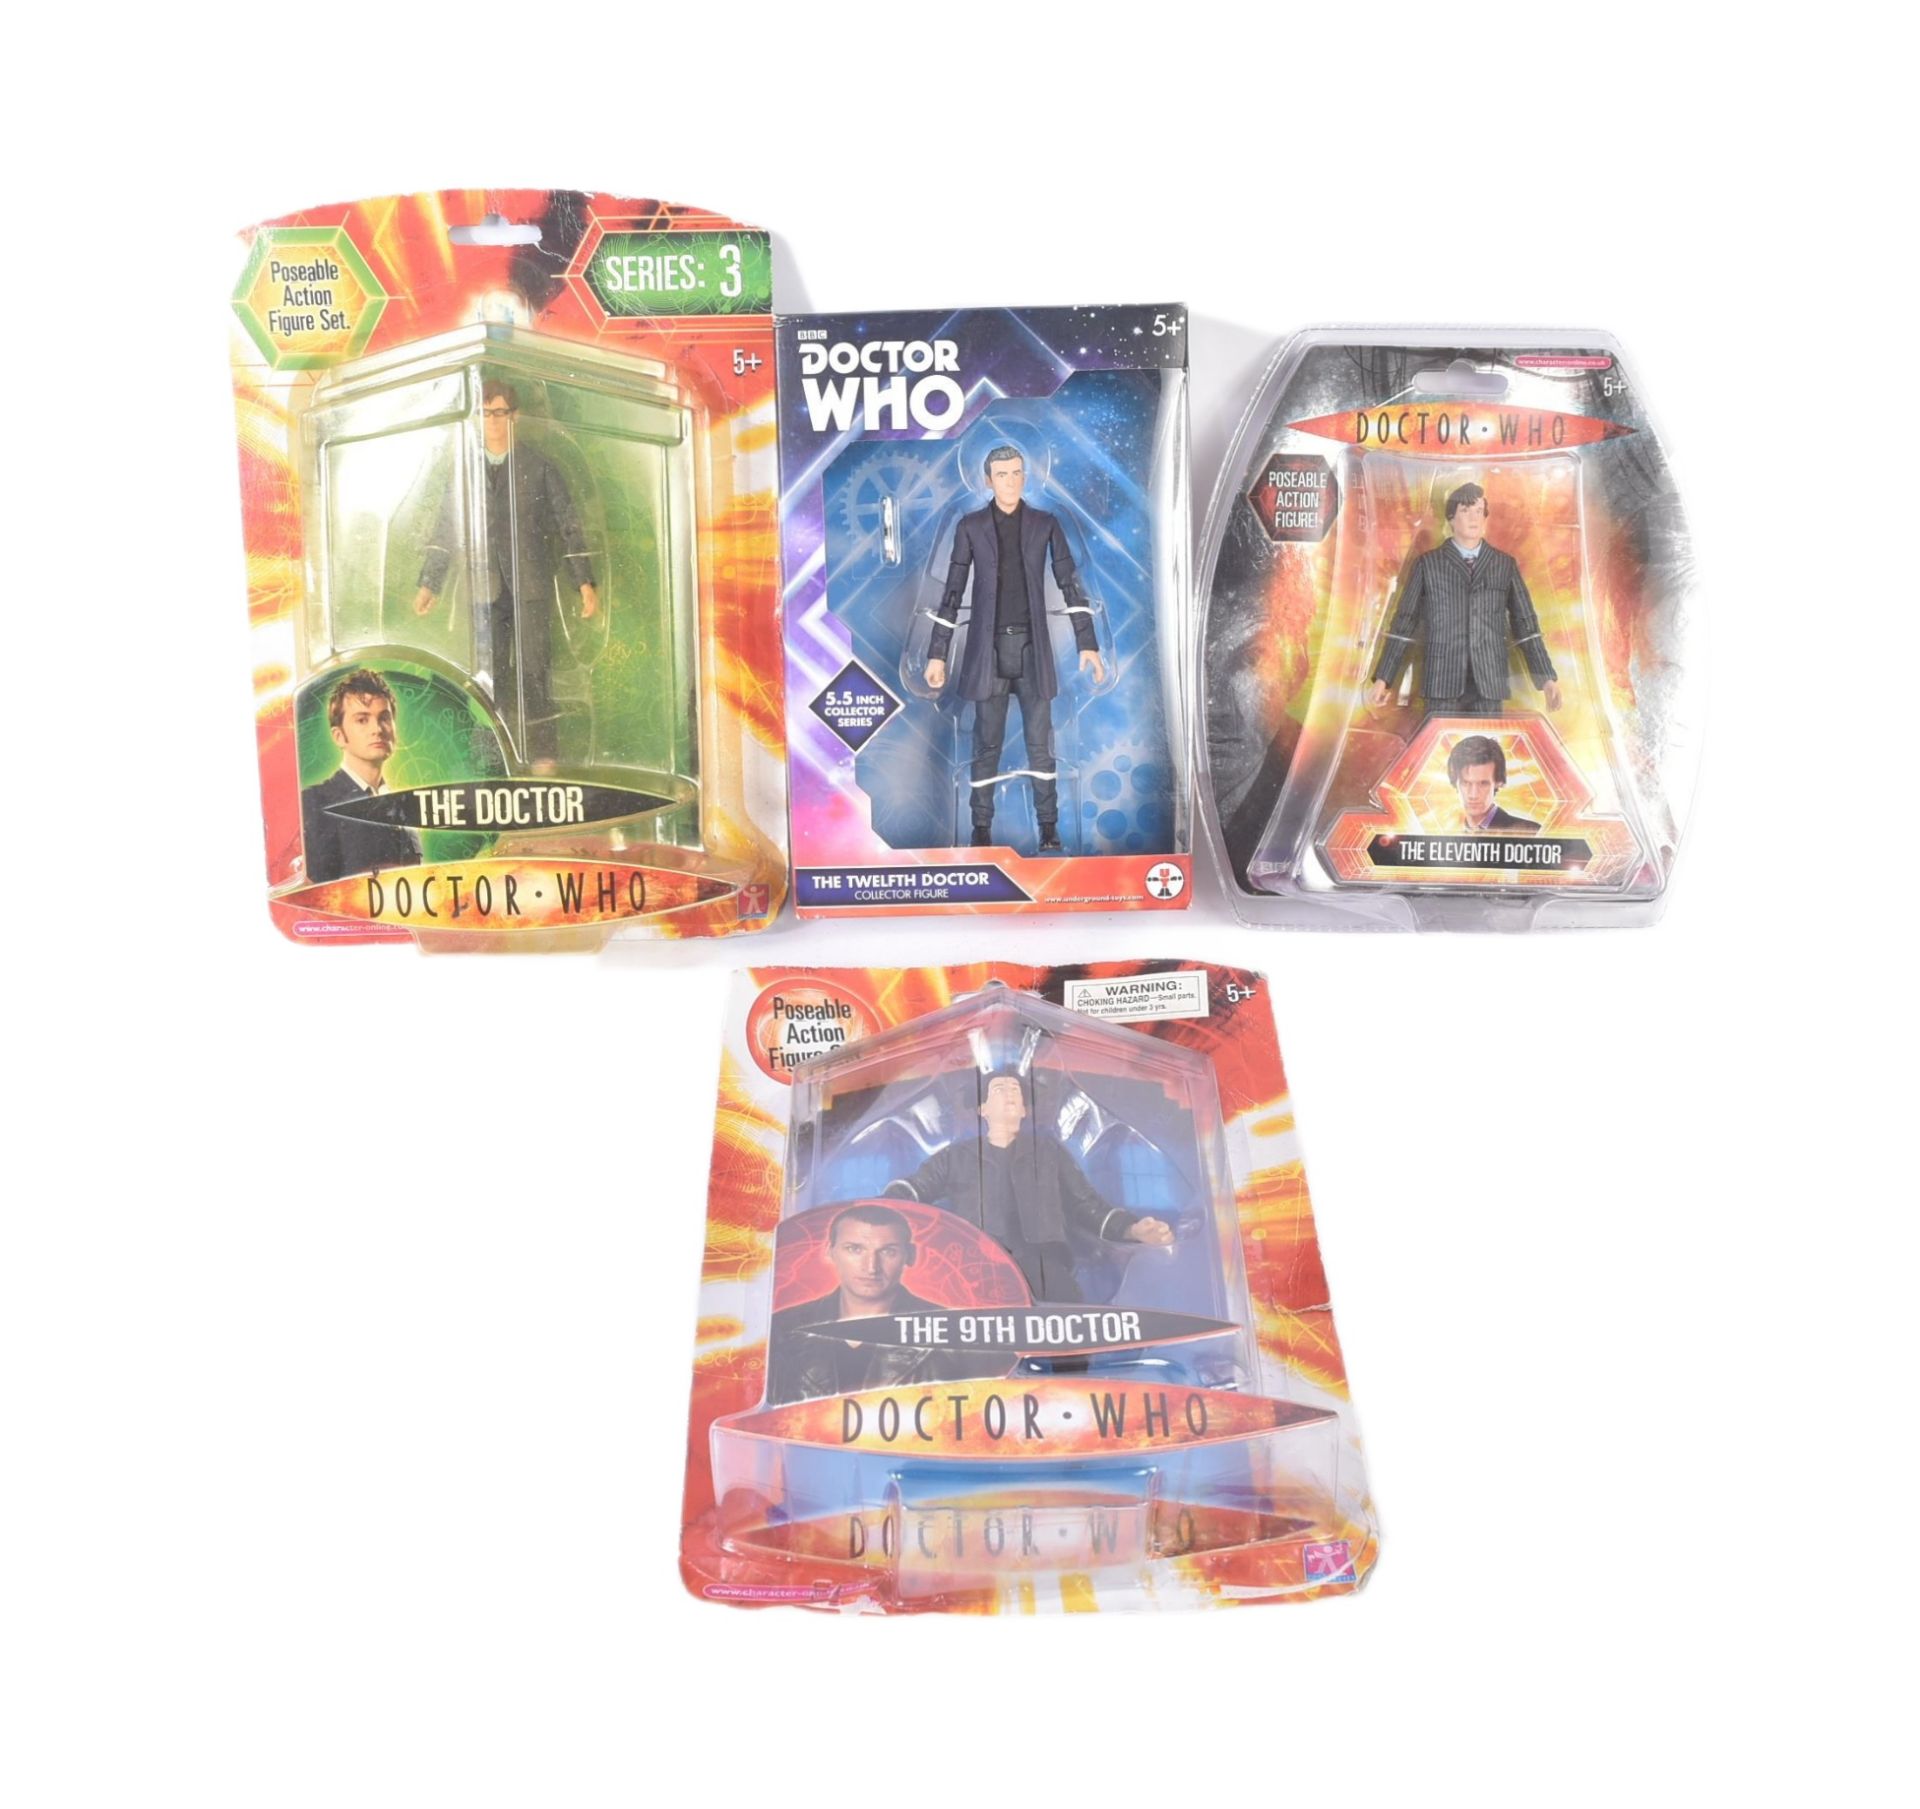 DOCTOR WHO - THE DOCTORS - COLLECTION OF ACTION FIGURES